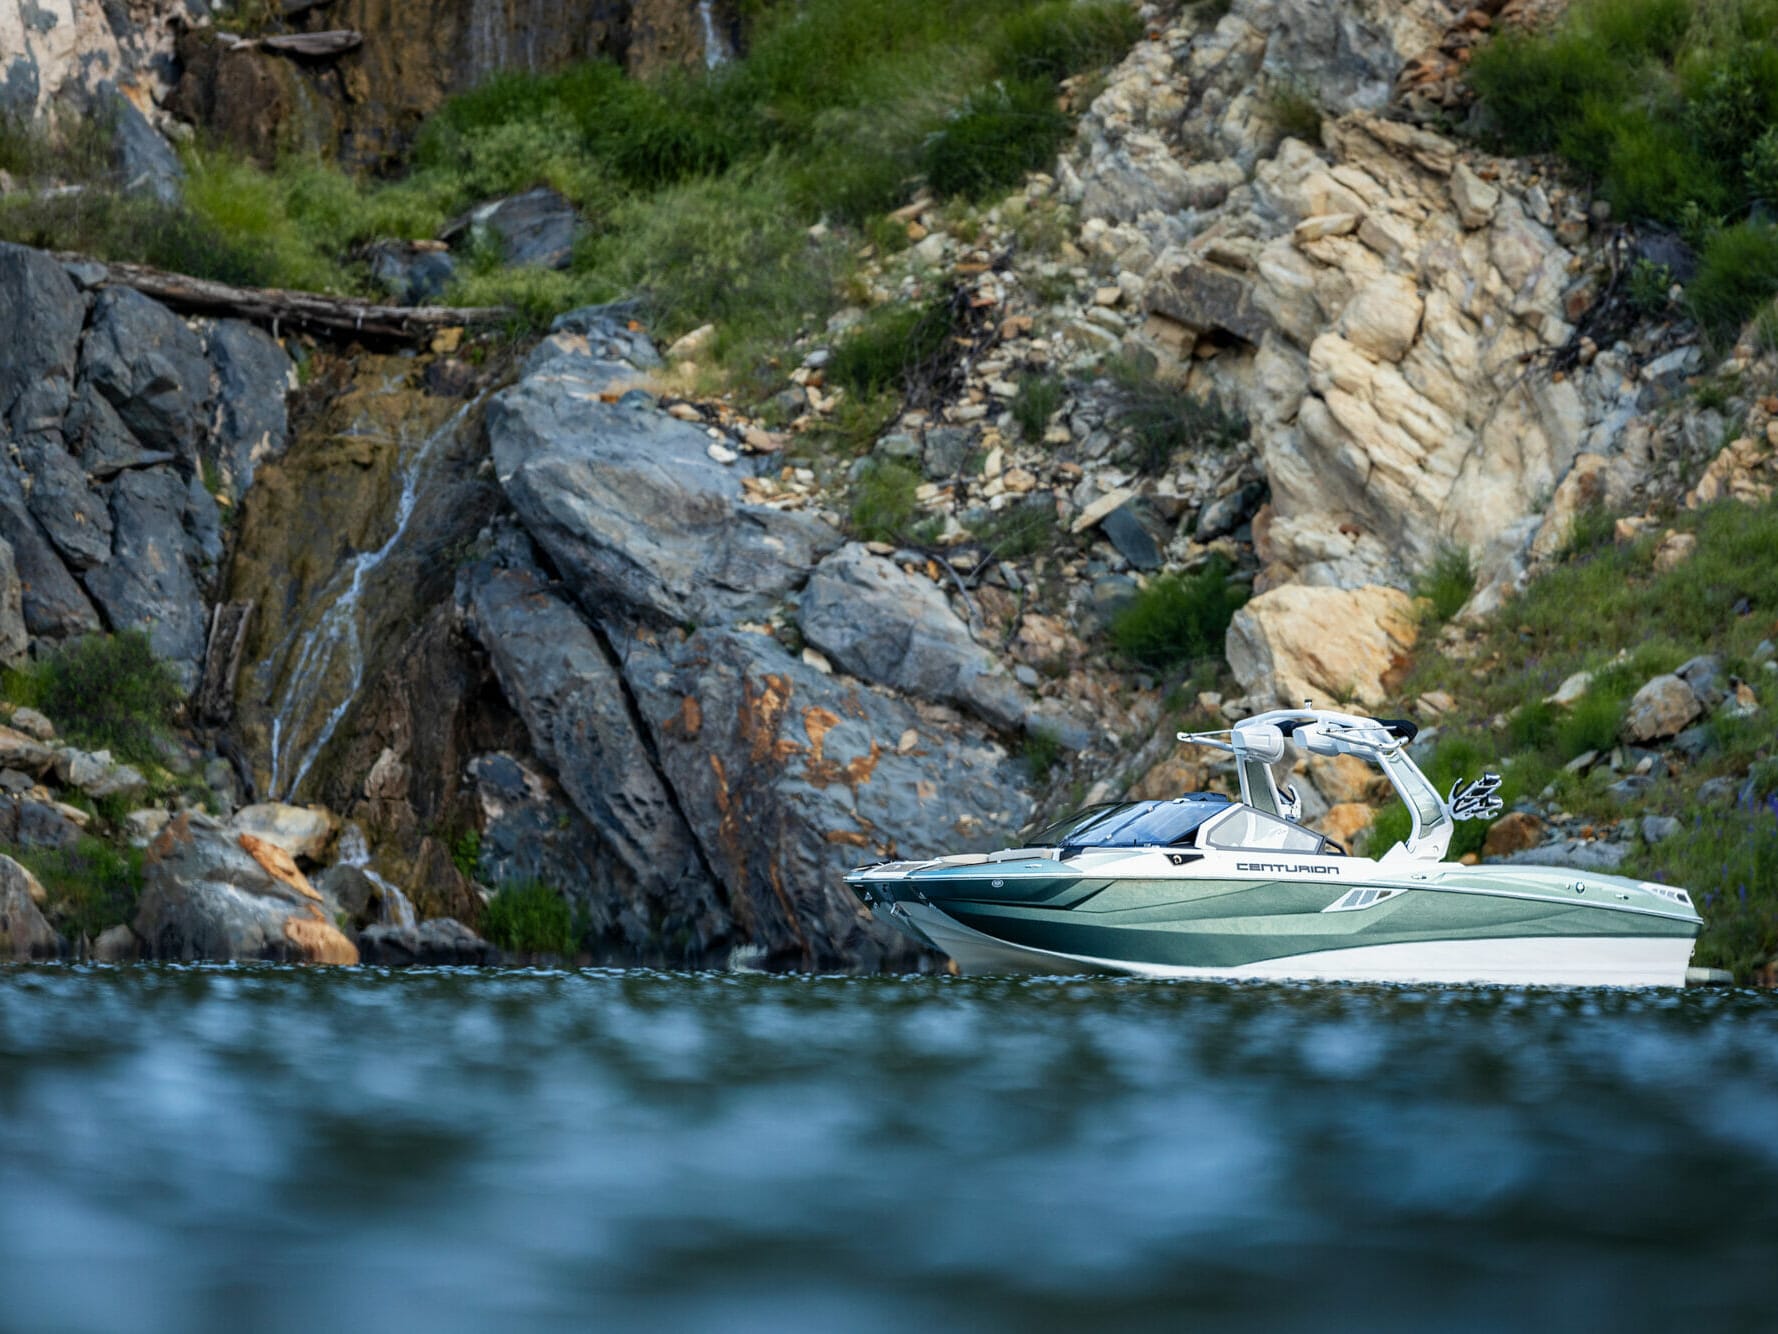 A wakesurf boat on the water near a rocky cliff.